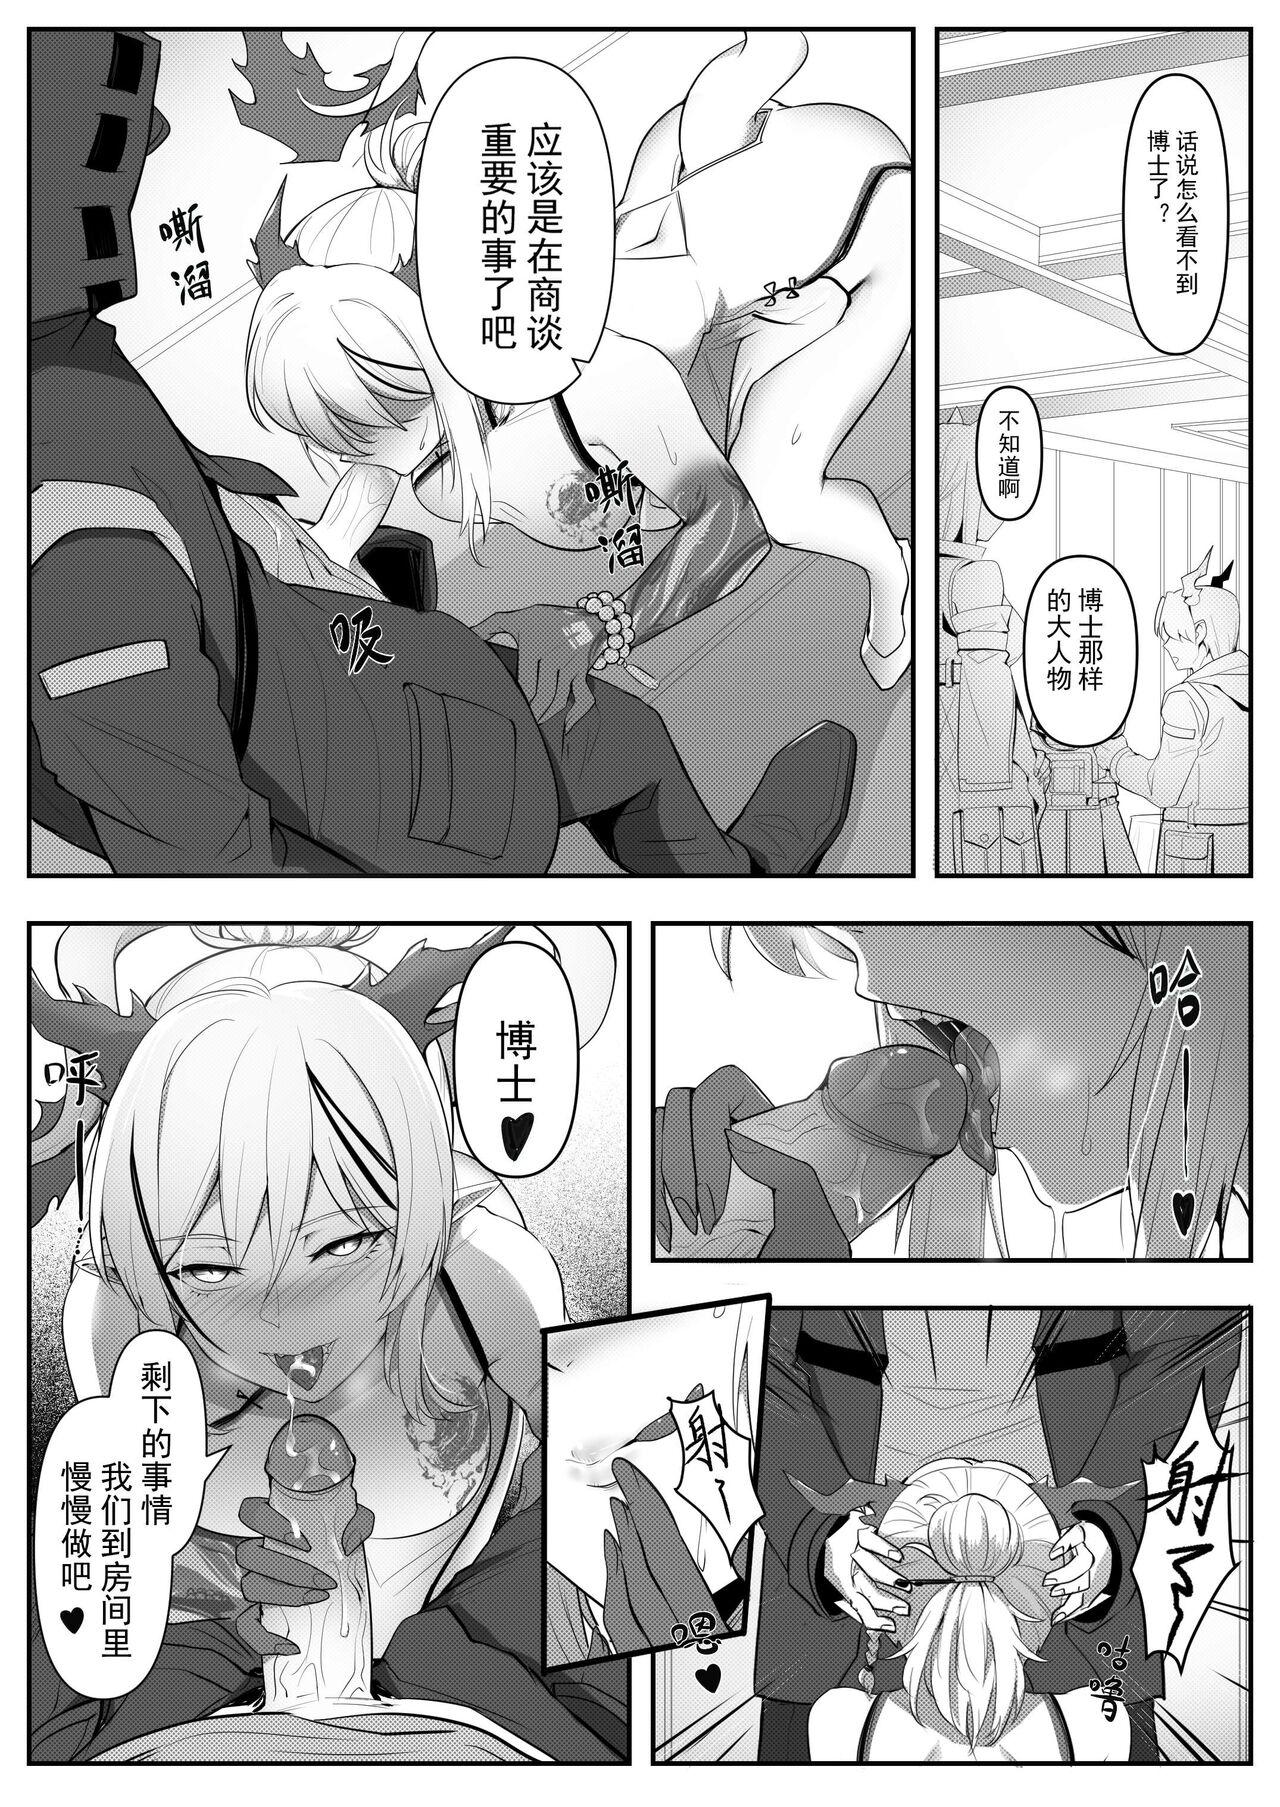 Naked Women Fucking 干员性爱秘闻录·年の欲情依存 - Arknights Girl On Girl - Page 6